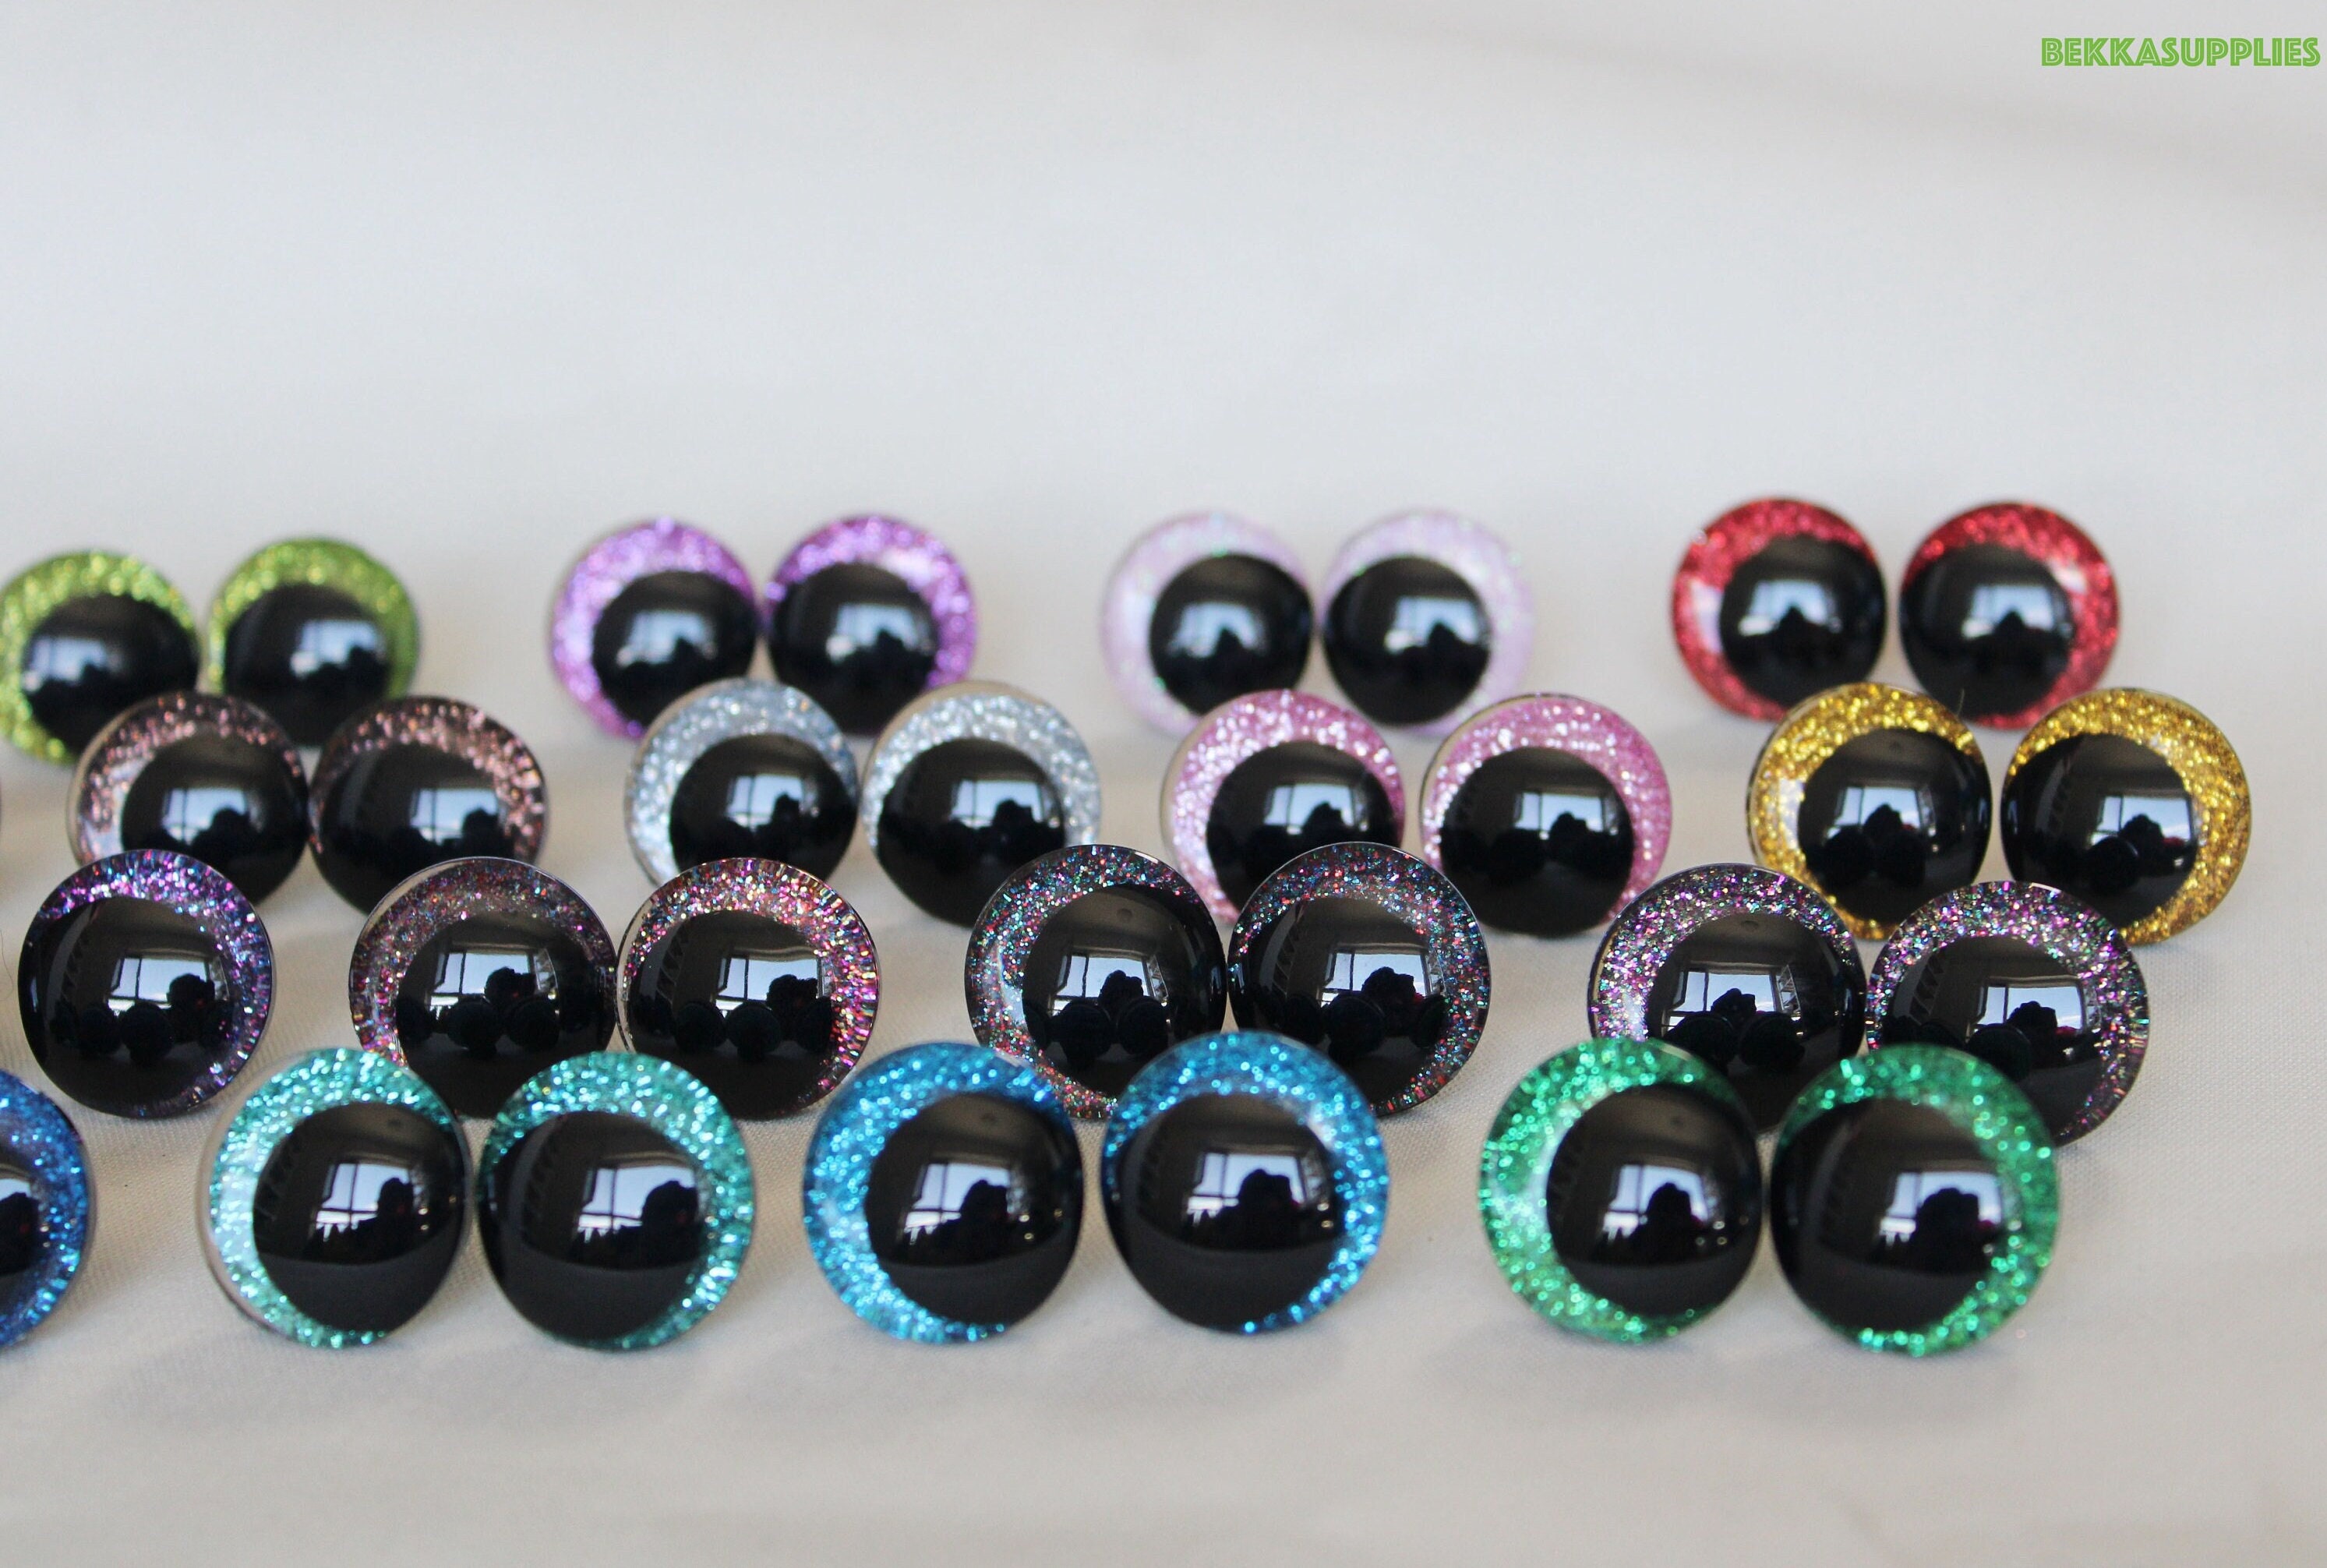 Tanstic 48Pcs 20mm Glitter Plastic Safety Eyes Half Round Eyes Stuffed  Animal Eyes for DIY of Puppet, Bear, Toy Doll Making Supplies